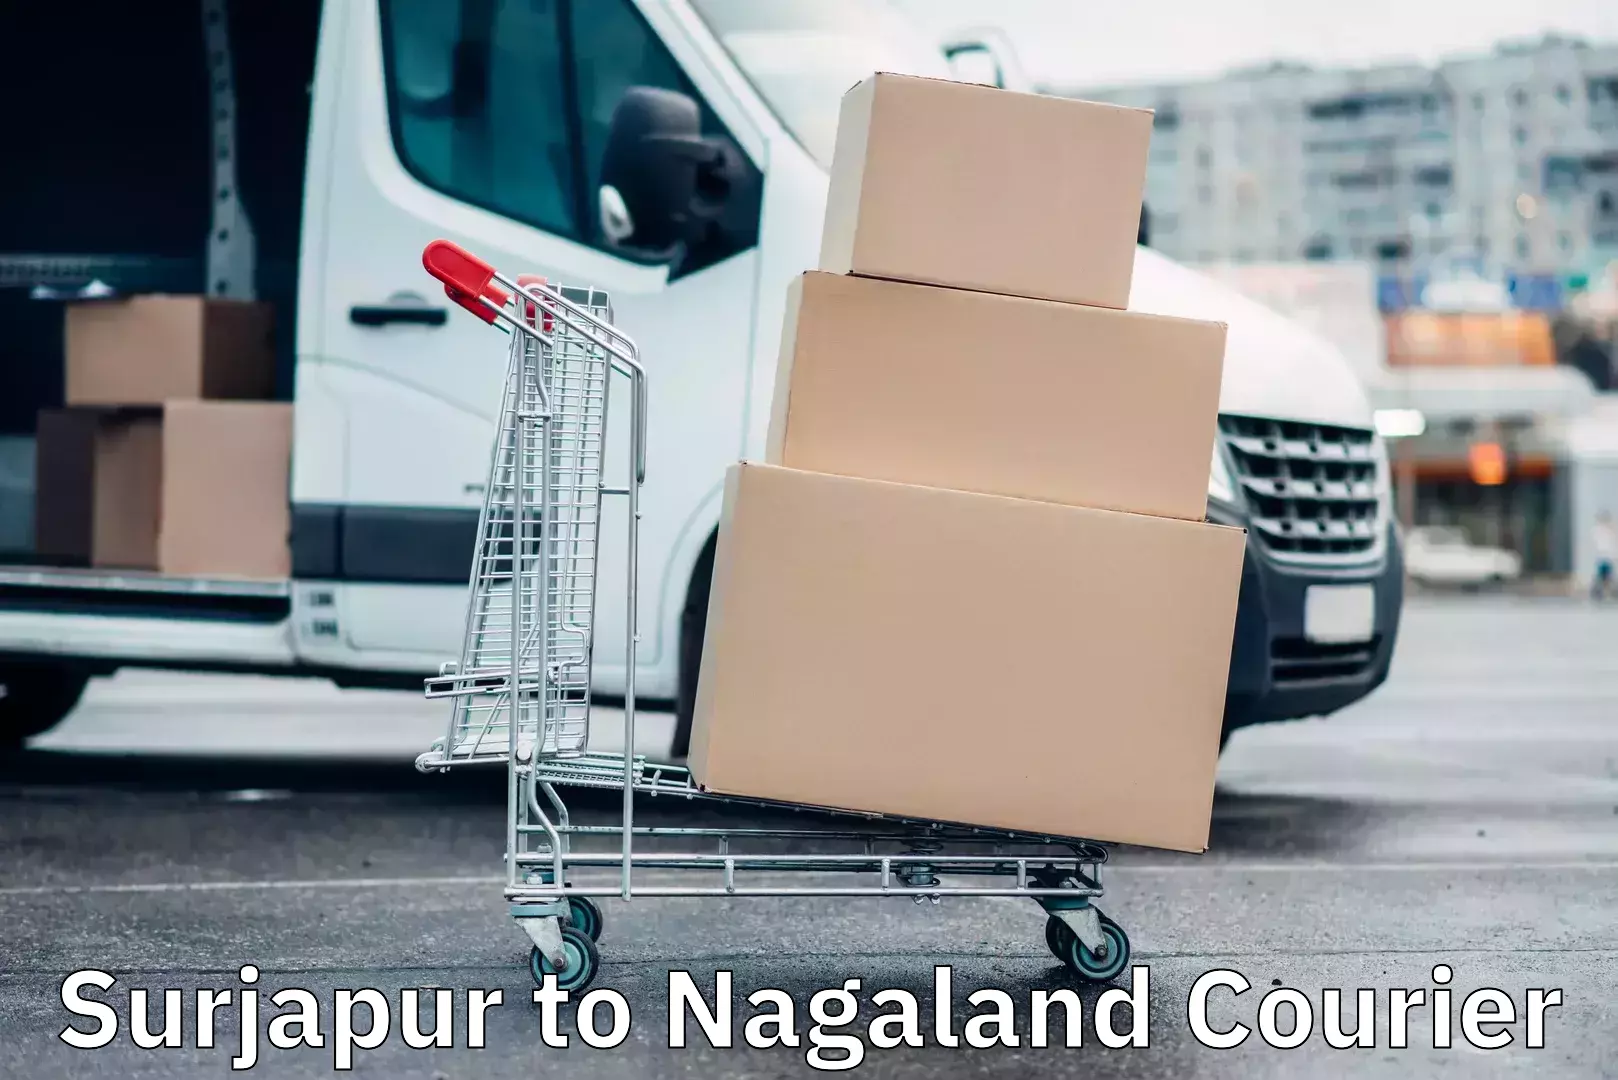 Fast delivery service Surjapur to Nagaland